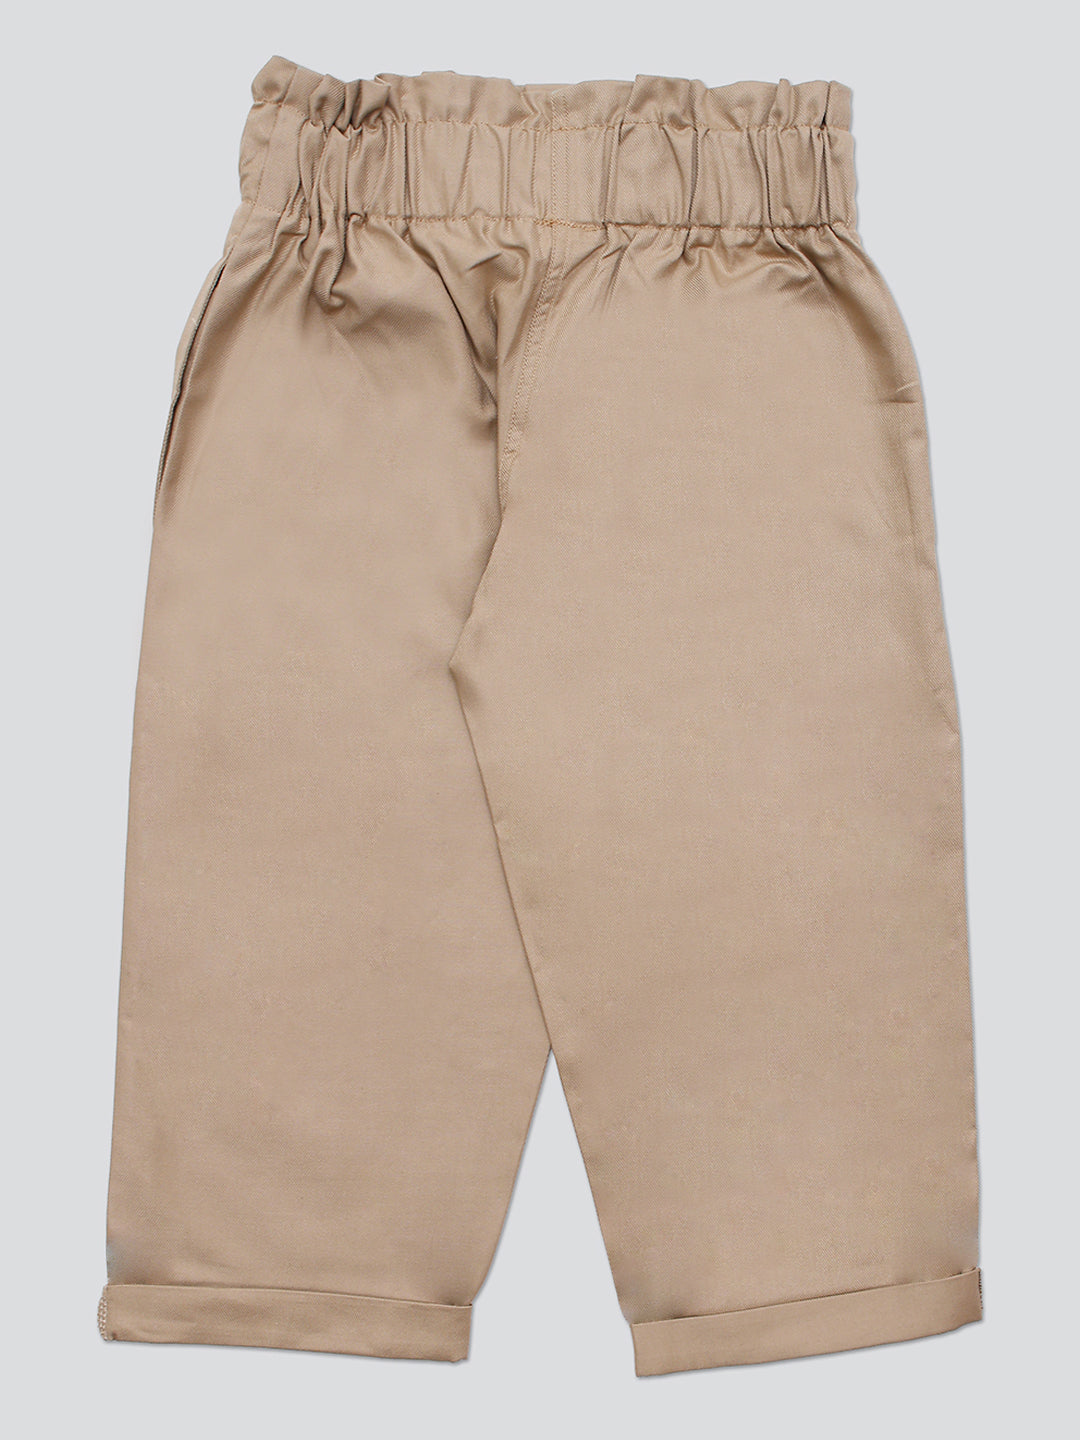 Pampolina Girls Solid Pant- Peach